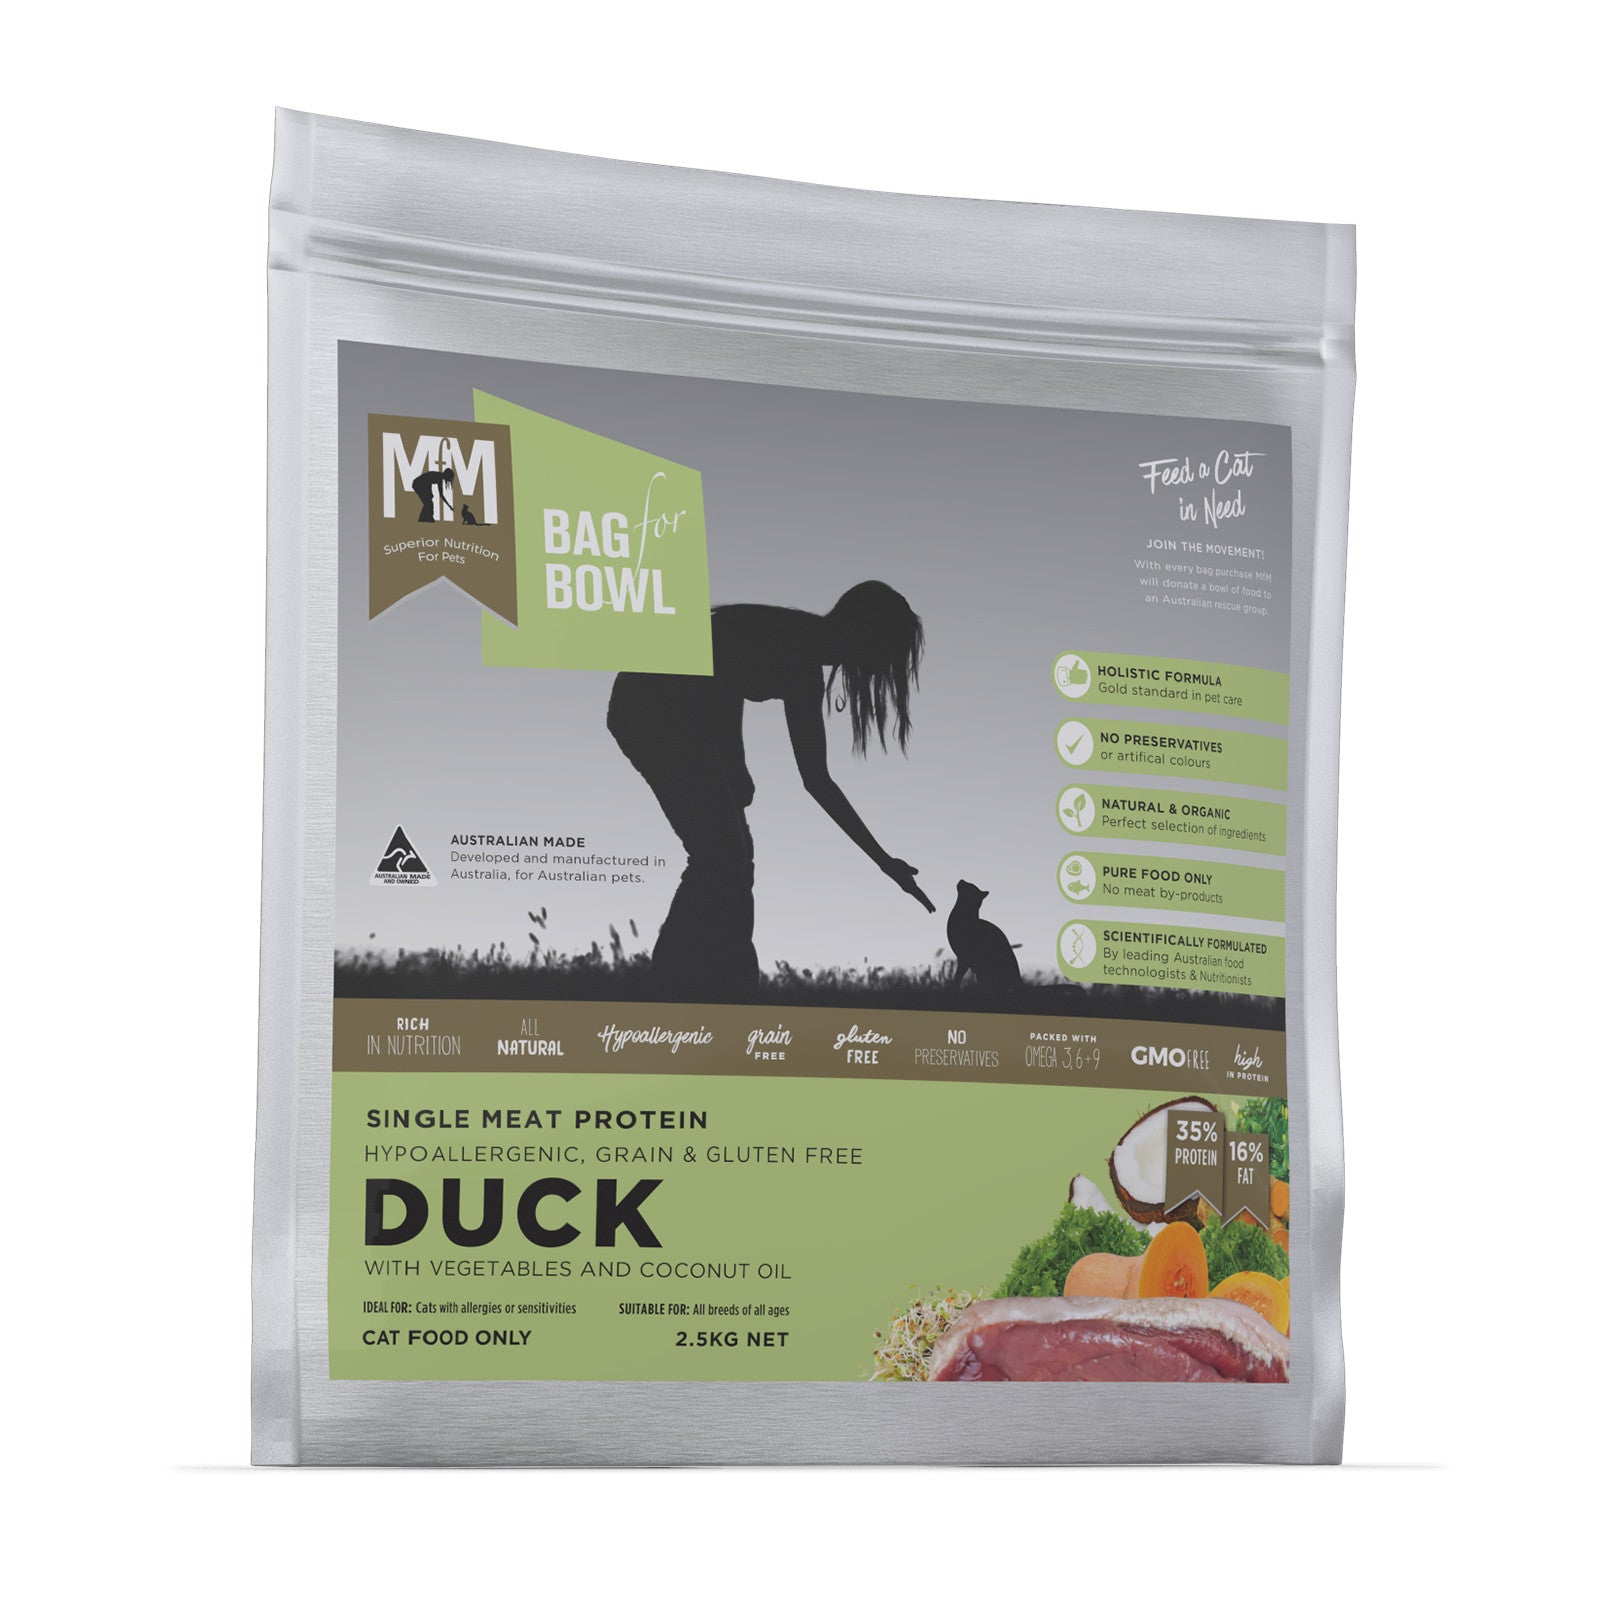 2.5kg bag of MFM Single Meat Protein Duck cat food.